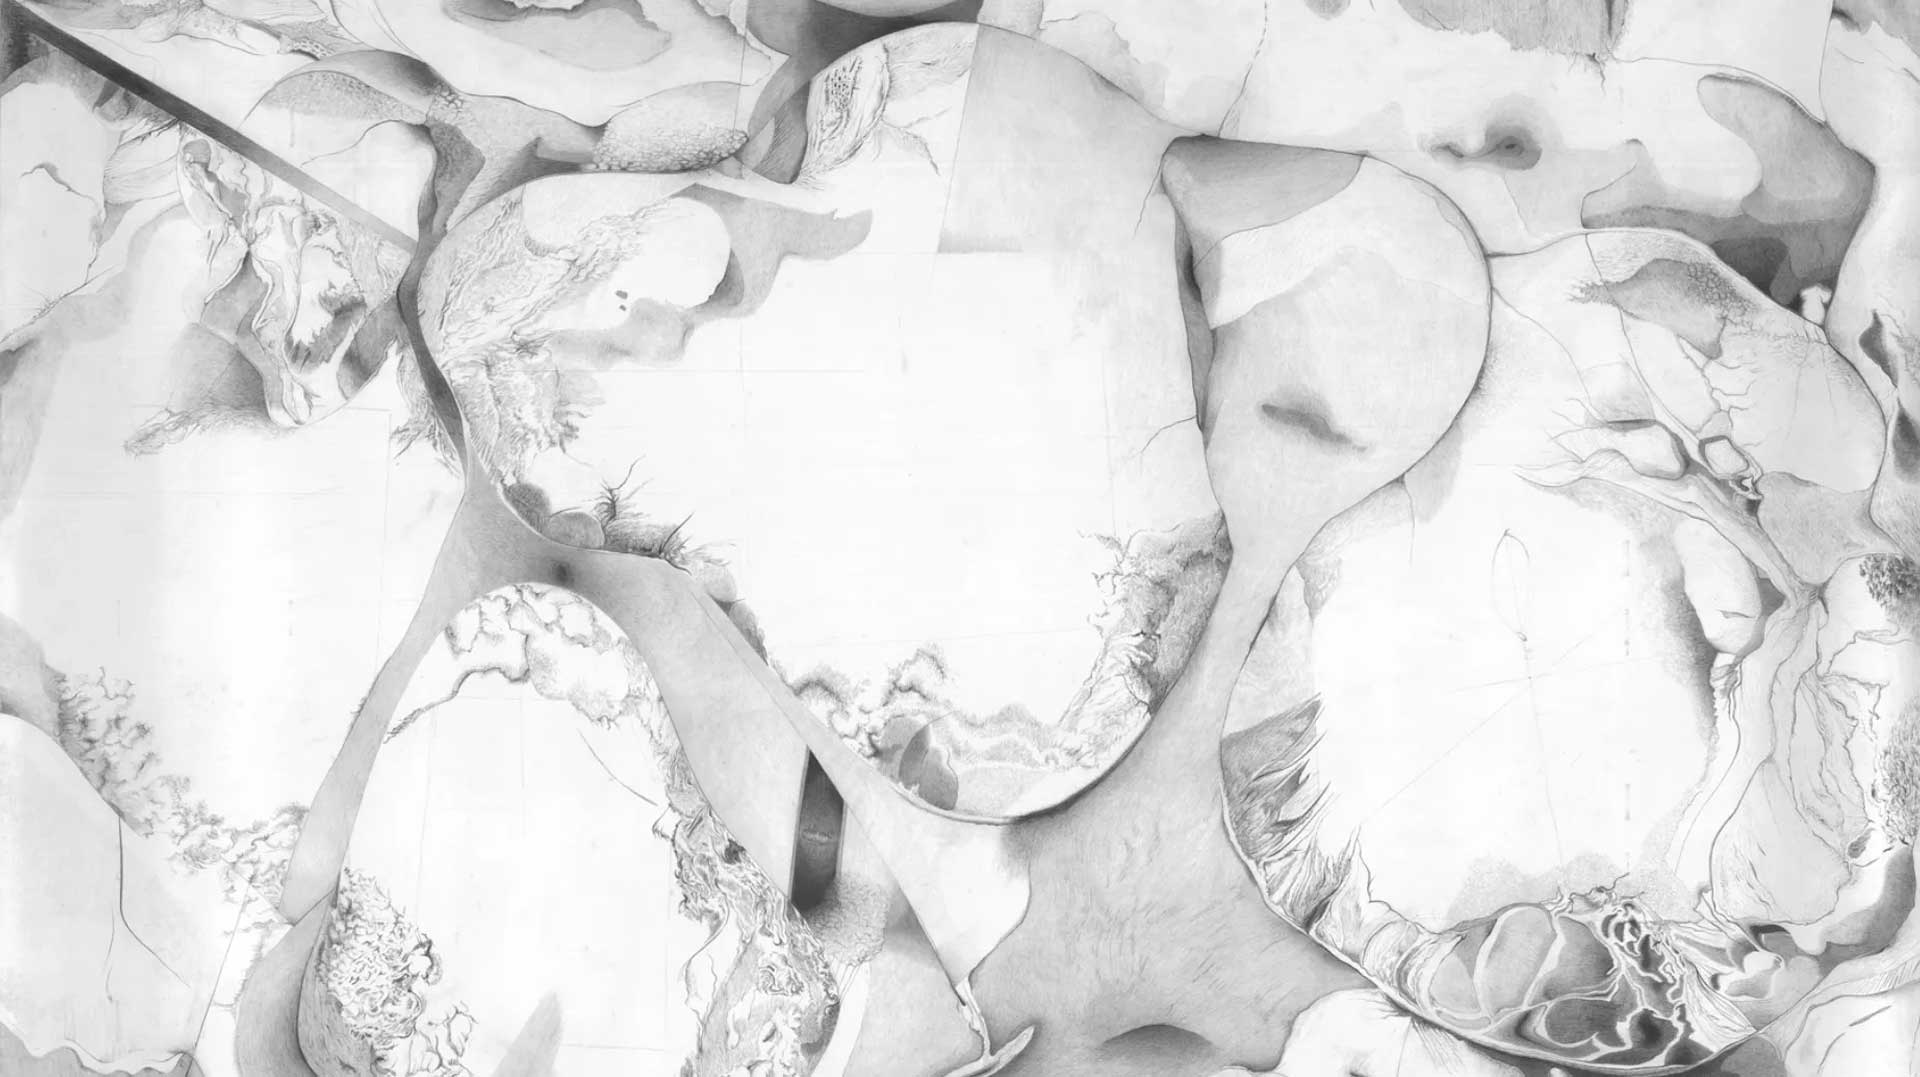 A black and white photo of some mushrooms.